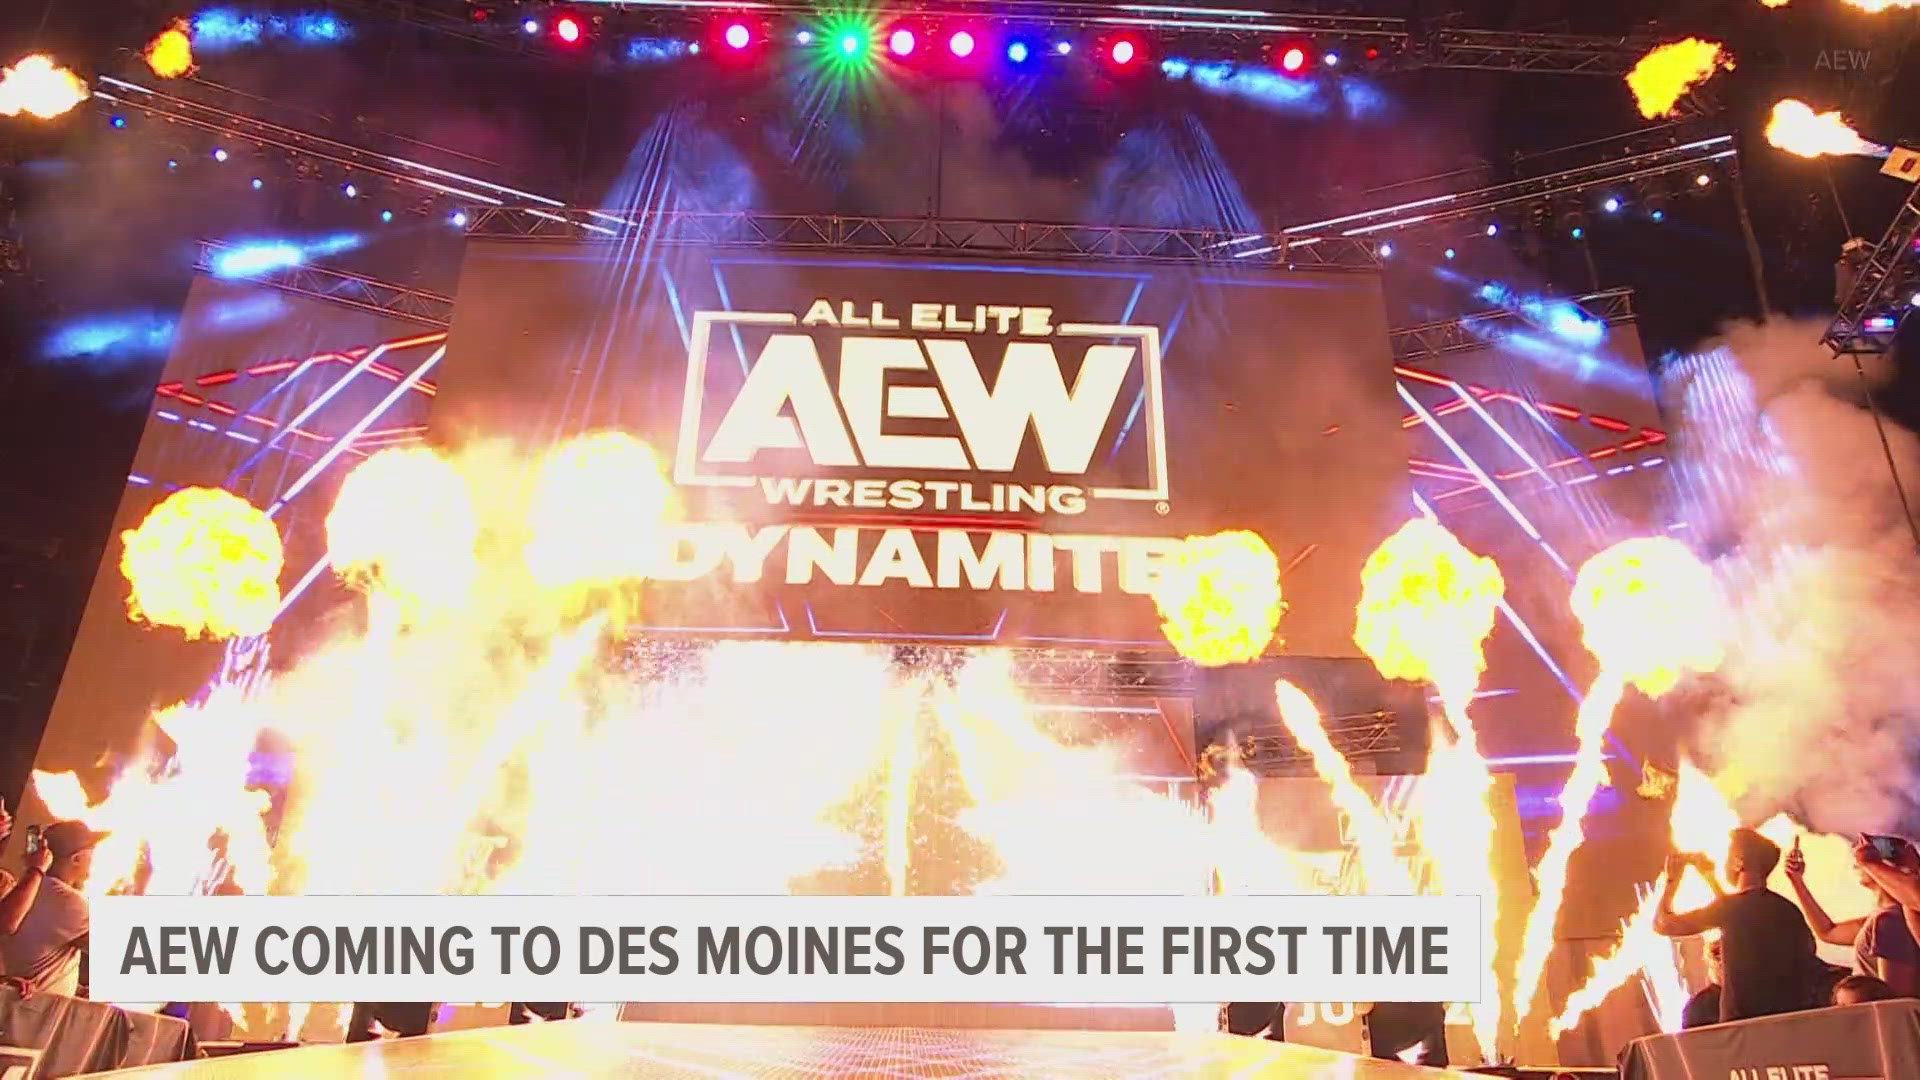 Some of the best professional wrestlers in the world will be making their
way to Des Moines tomorrow for AEW Dynamite.